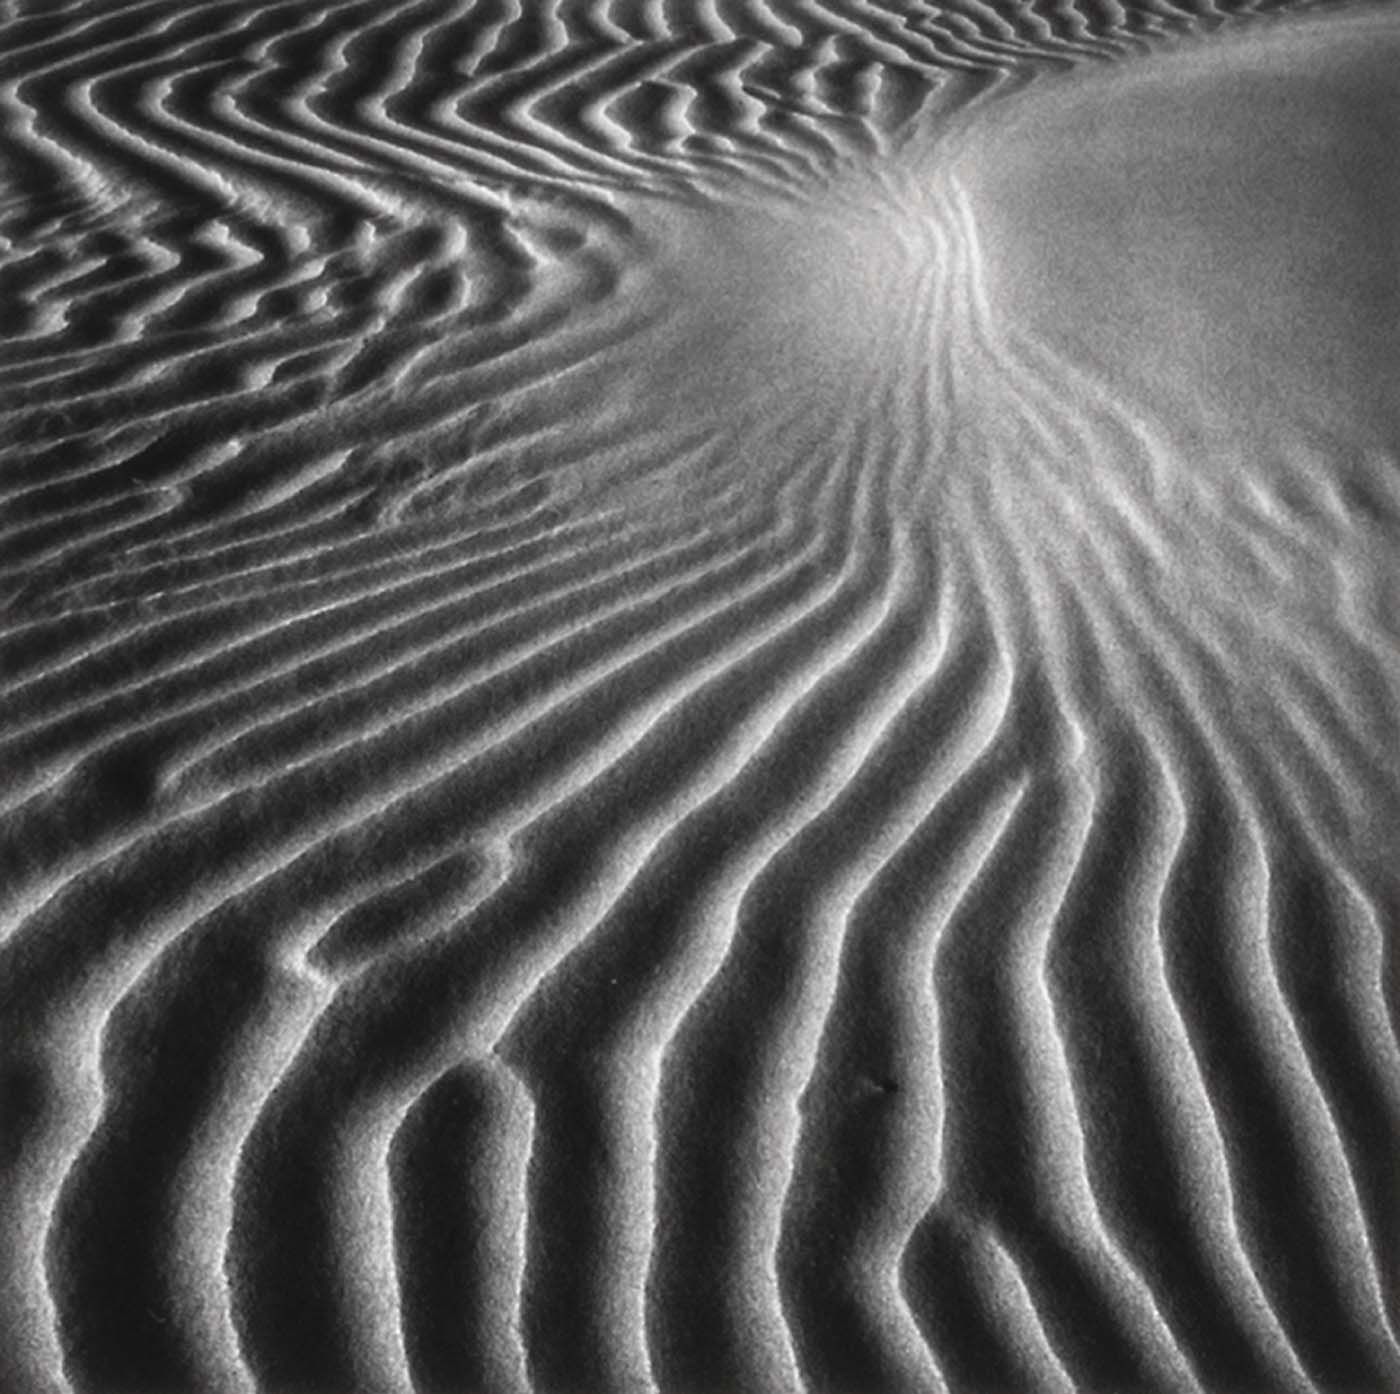 Pin by Victoria Thibeau on DUNEs | Pinterest | Detail and Photography